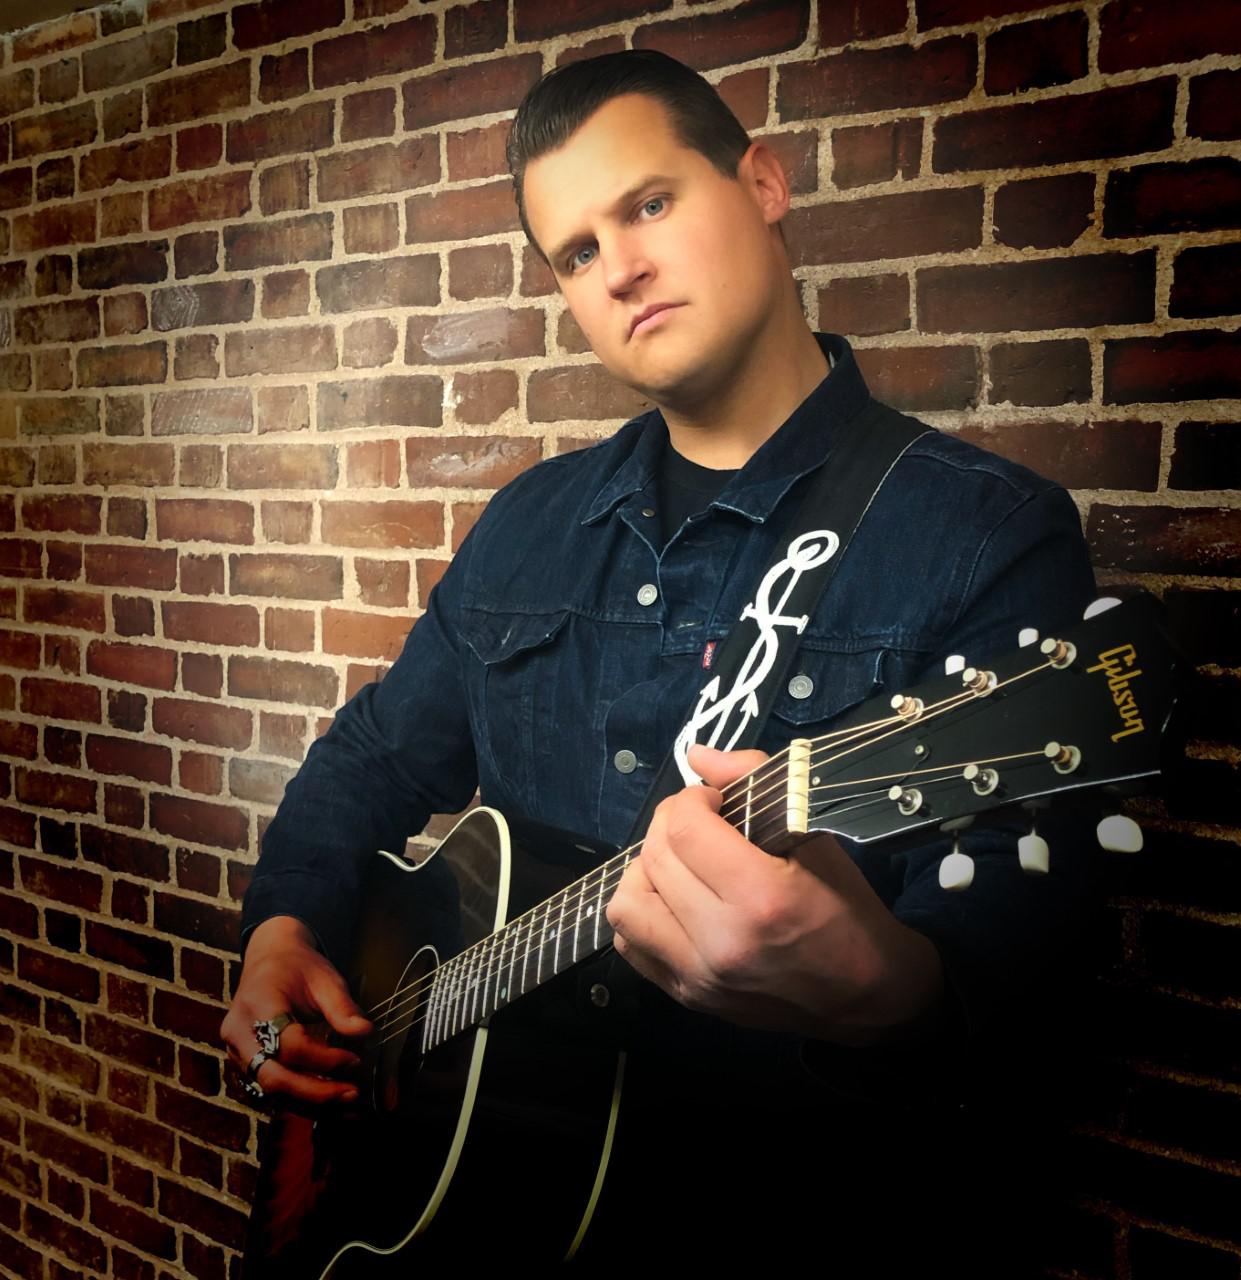 Middletown musician Joey Wit hosting charity concert at Cafe 9 Friday